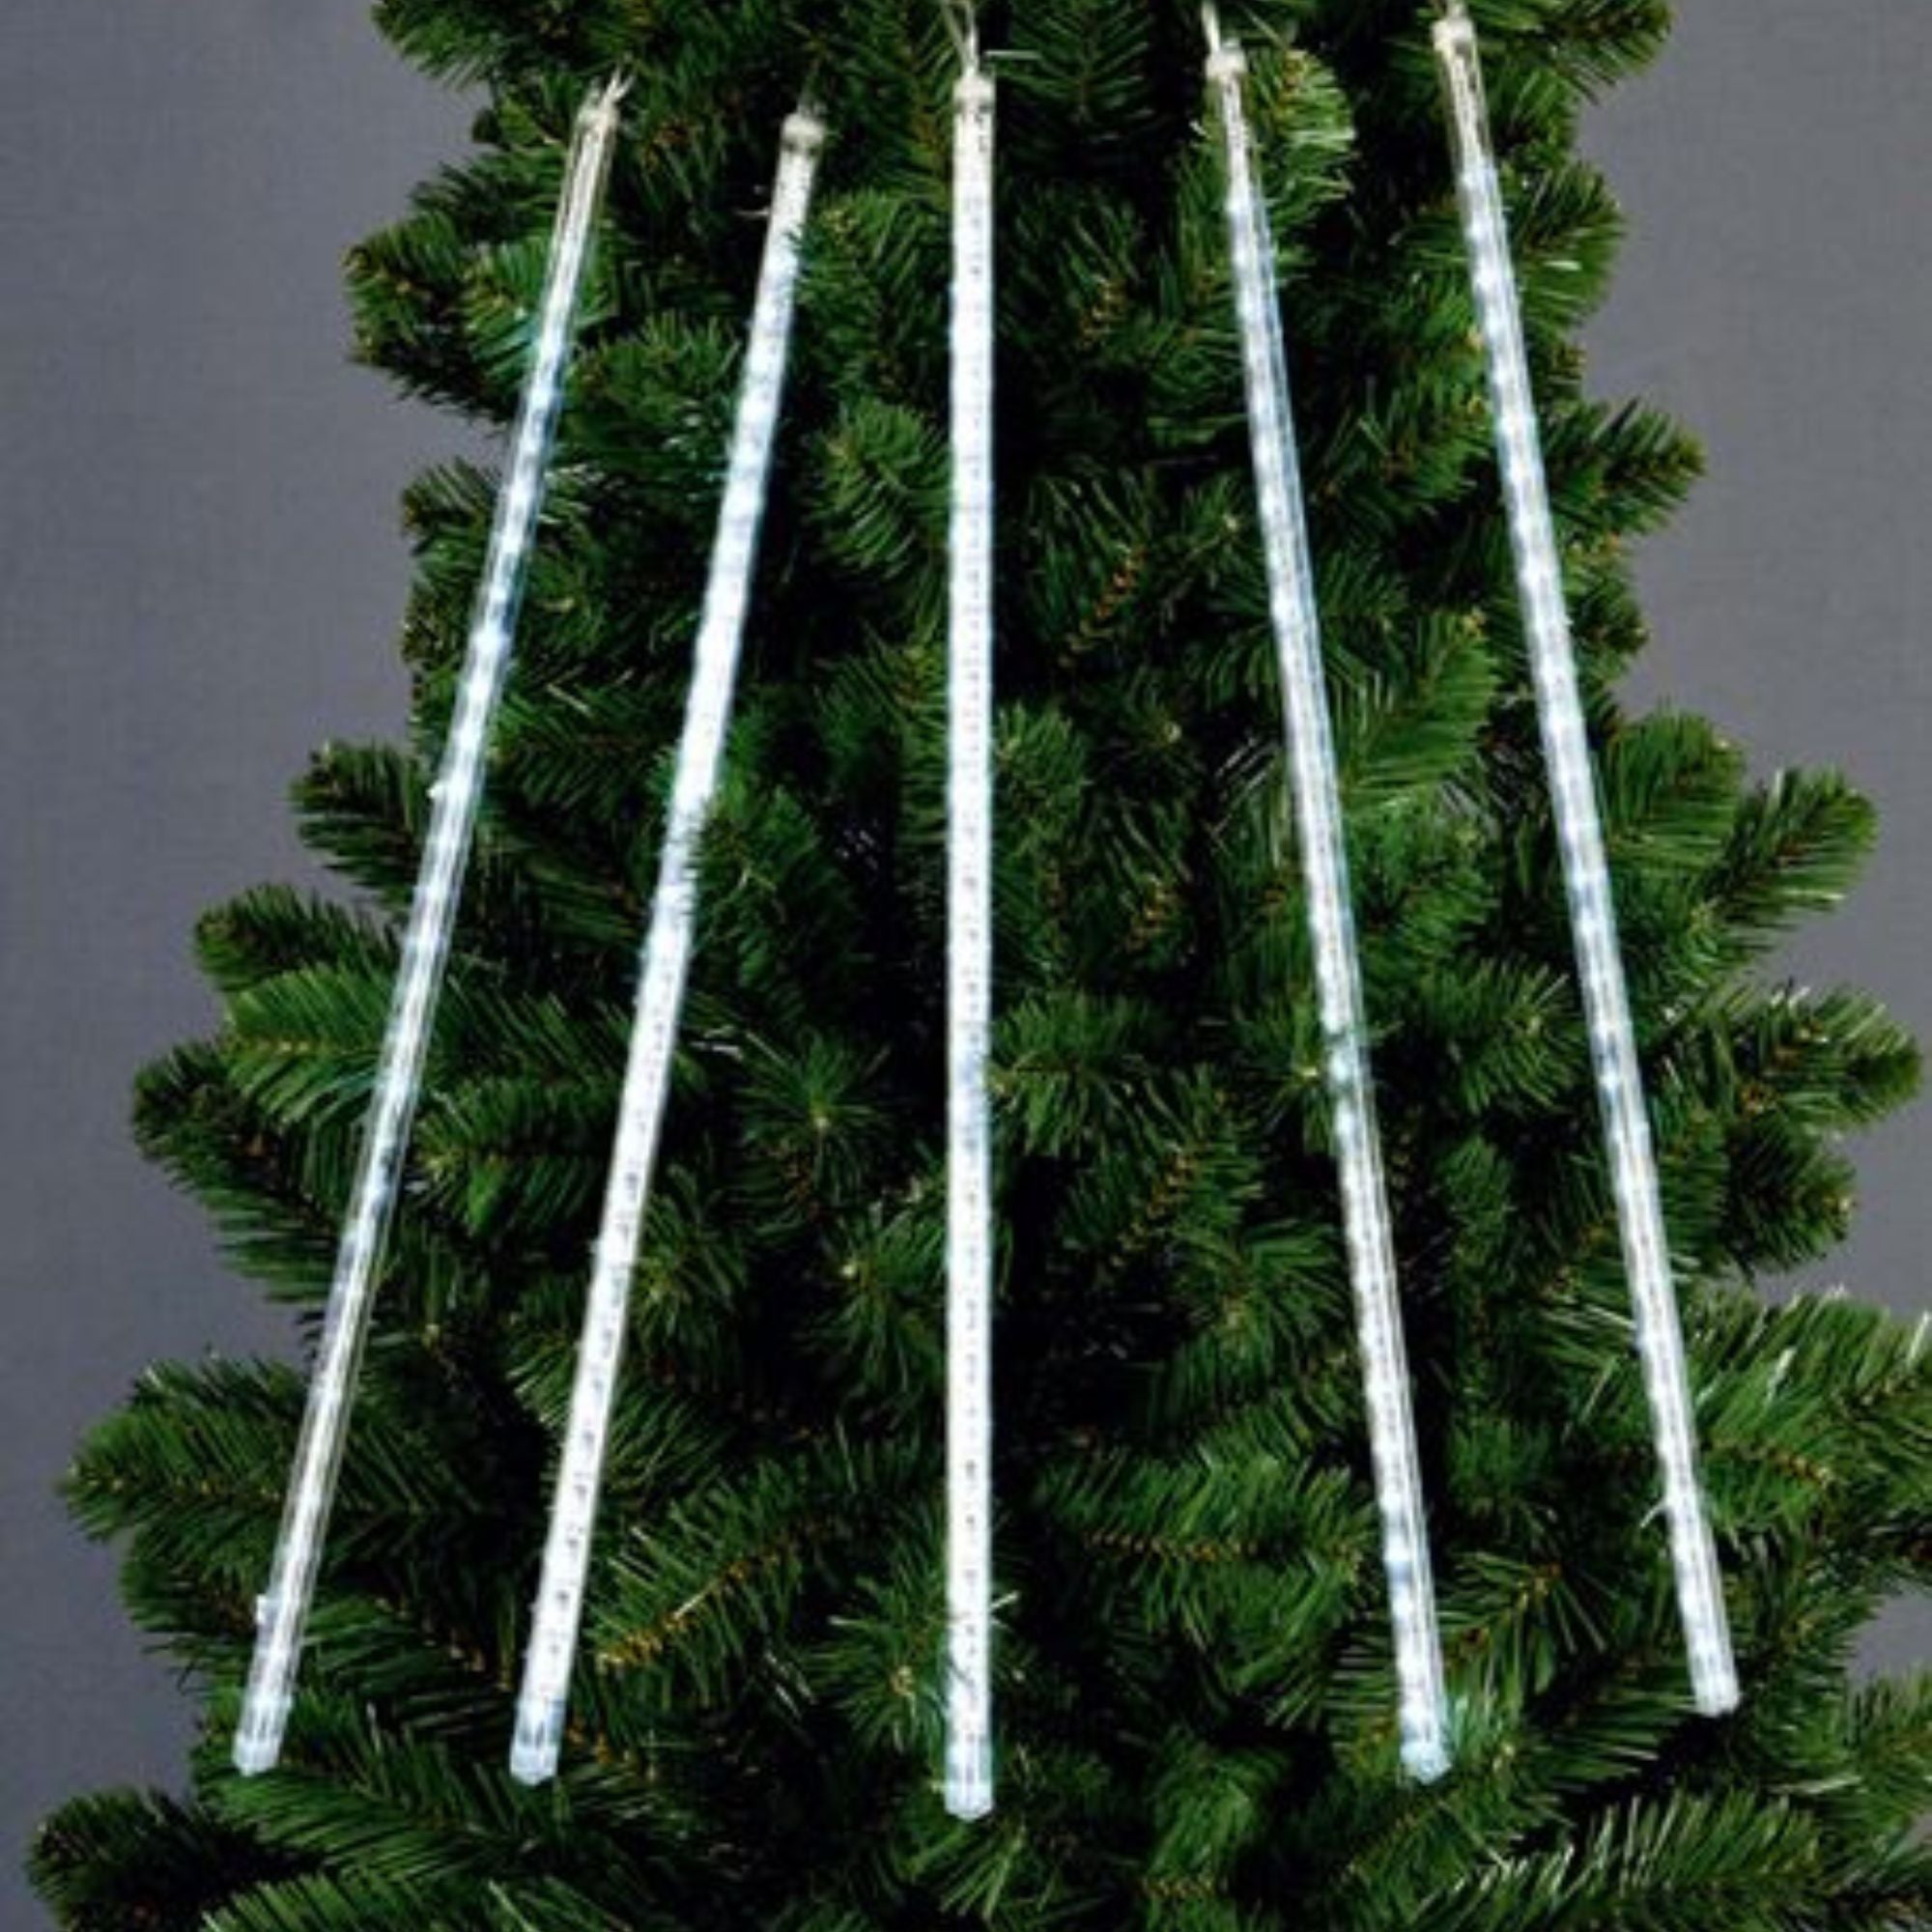 15pc 10.5m 70cm Premier Snowing Shower Icicle Christmas Lights with 450 Cool White LEDs